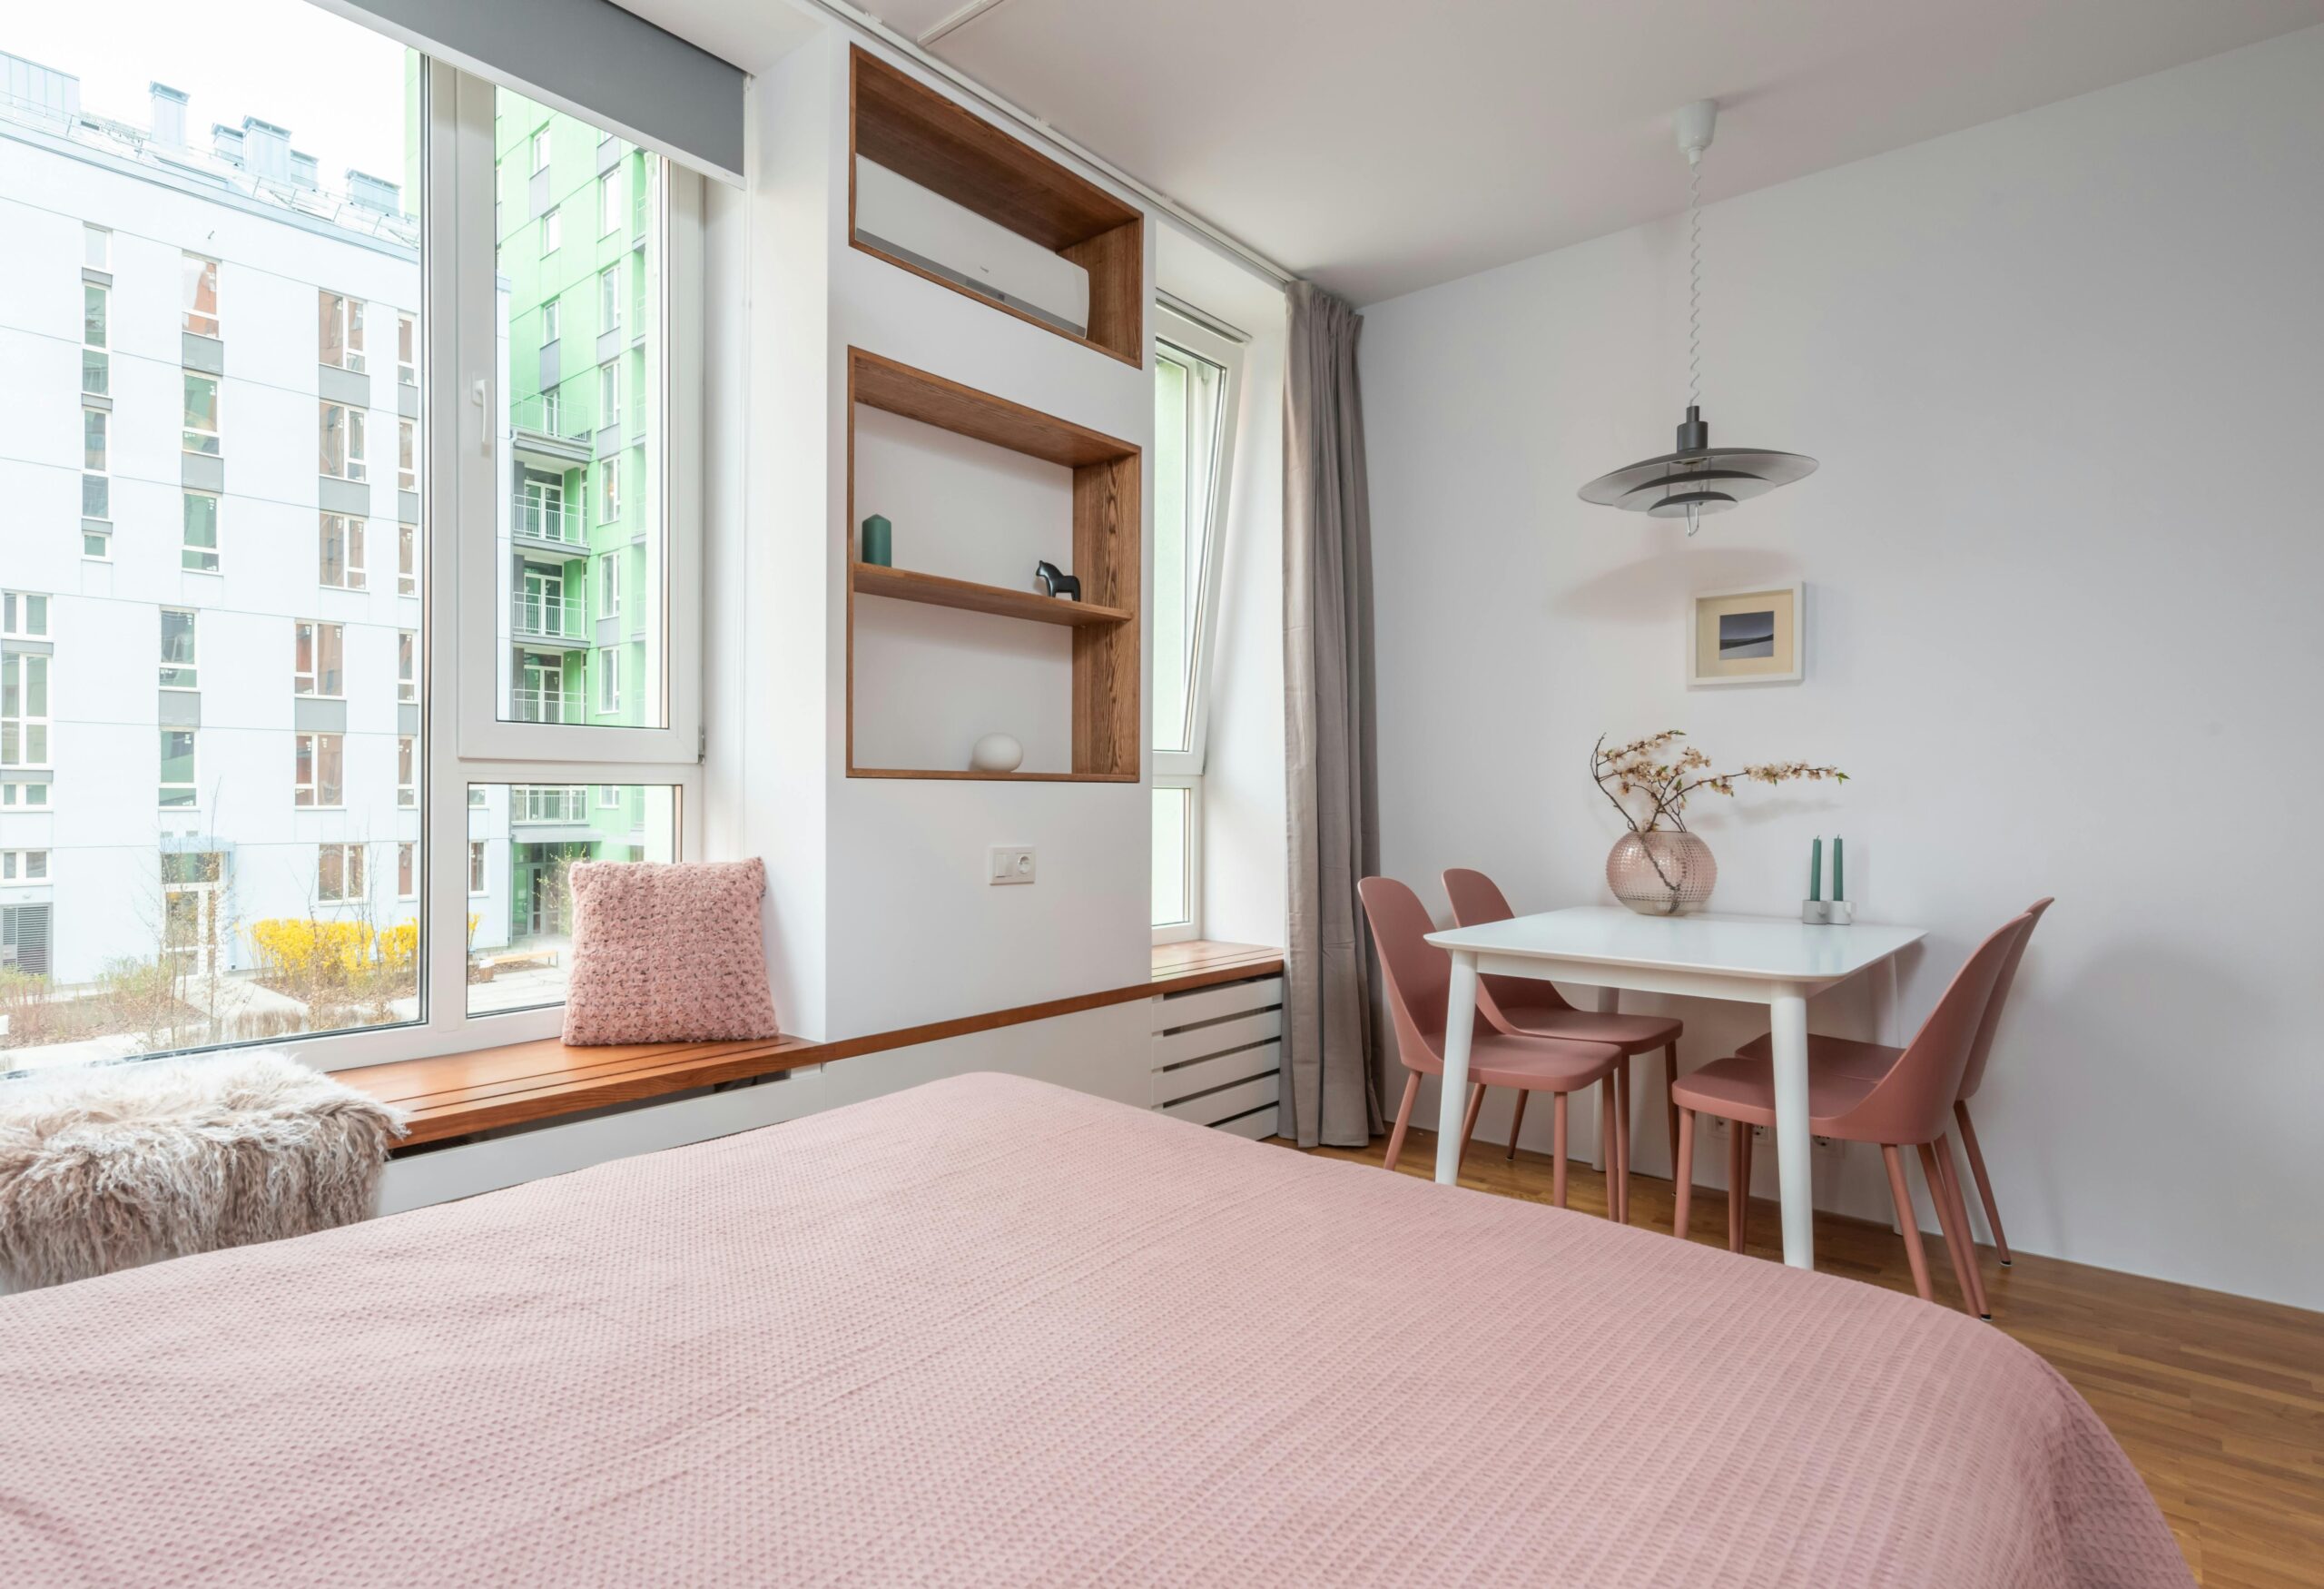 A bedroom with light pink decor